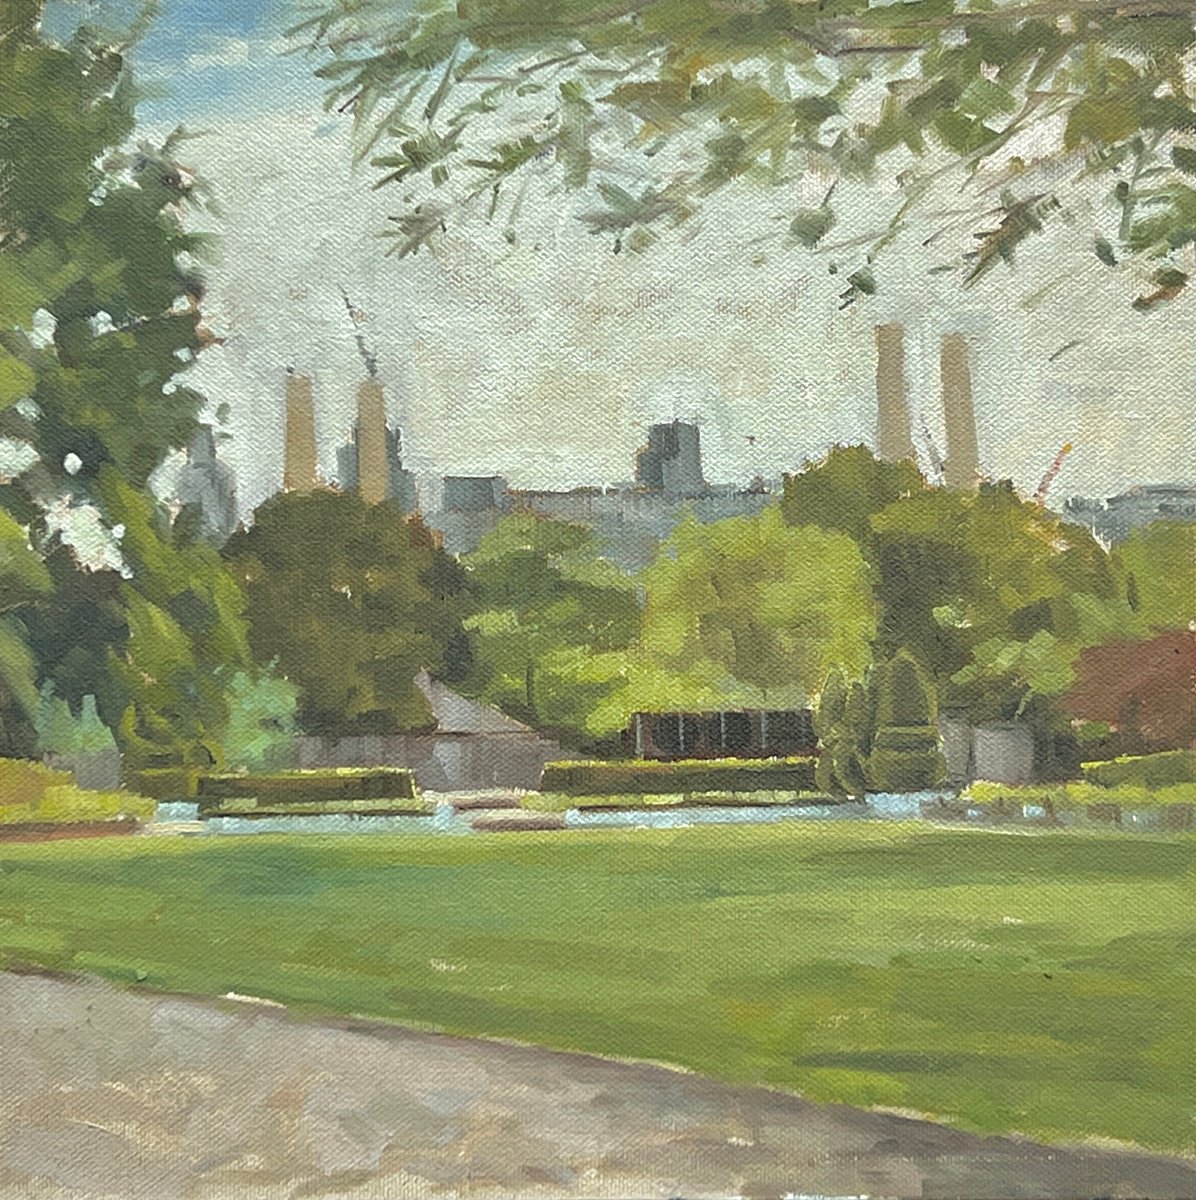 Battersea Power Station from the park by Louise Gillard